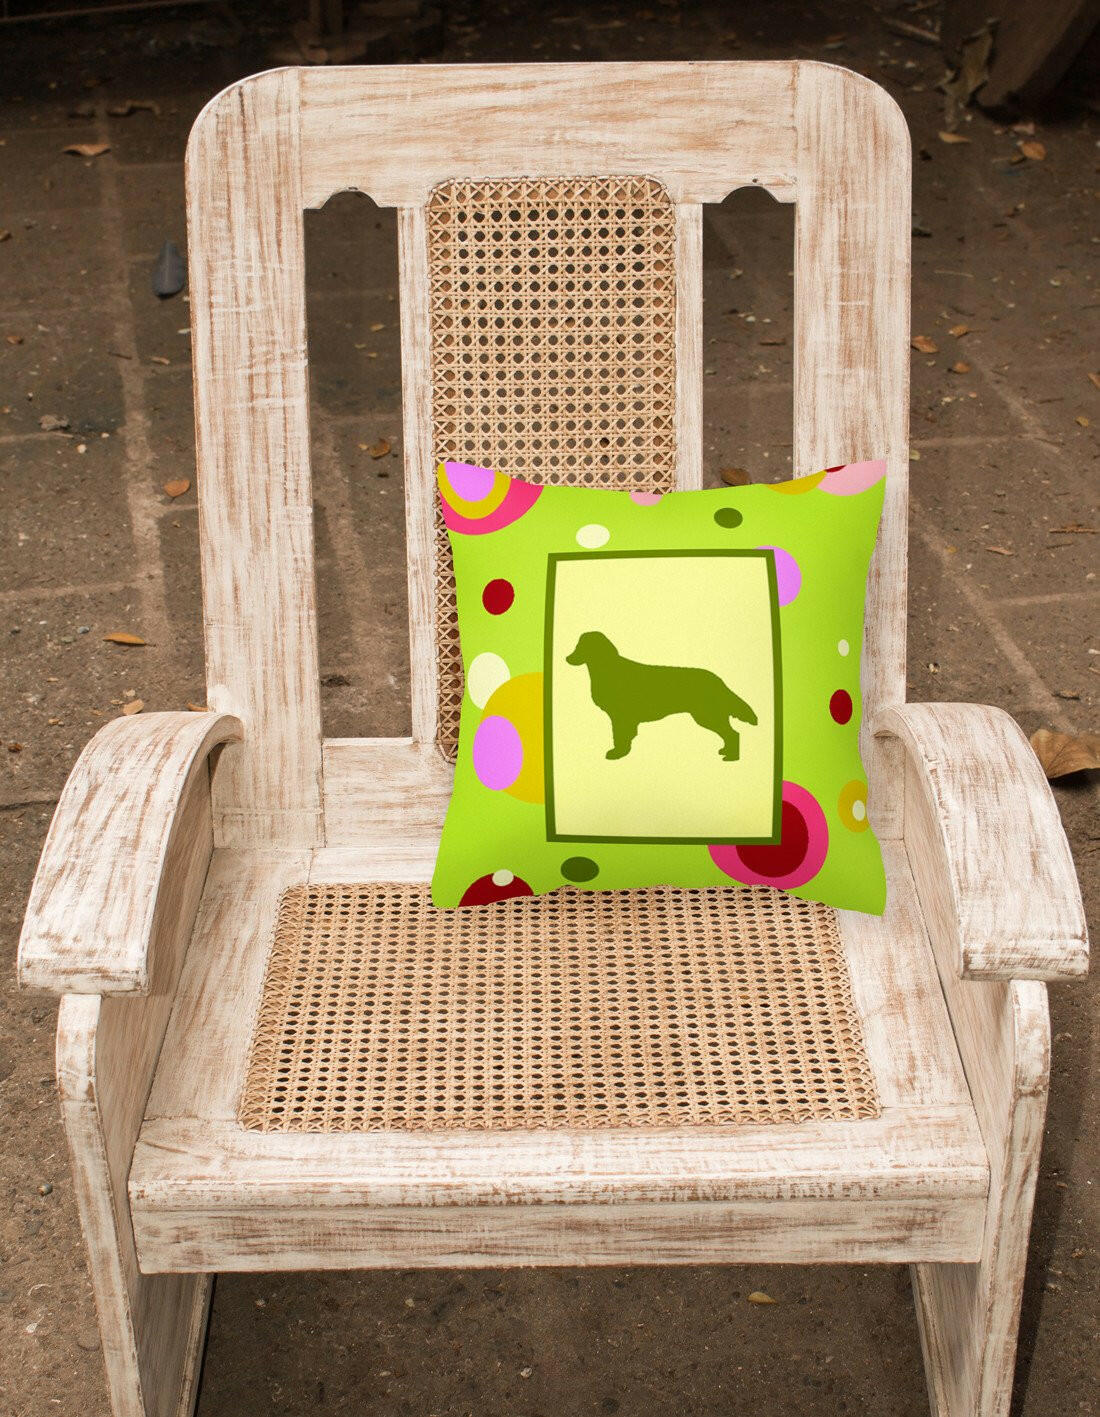 Lime Green Dots Flat Coated Retriever Fabric Decorative Pillow CK1031PW1414 by Caroline's Treasures